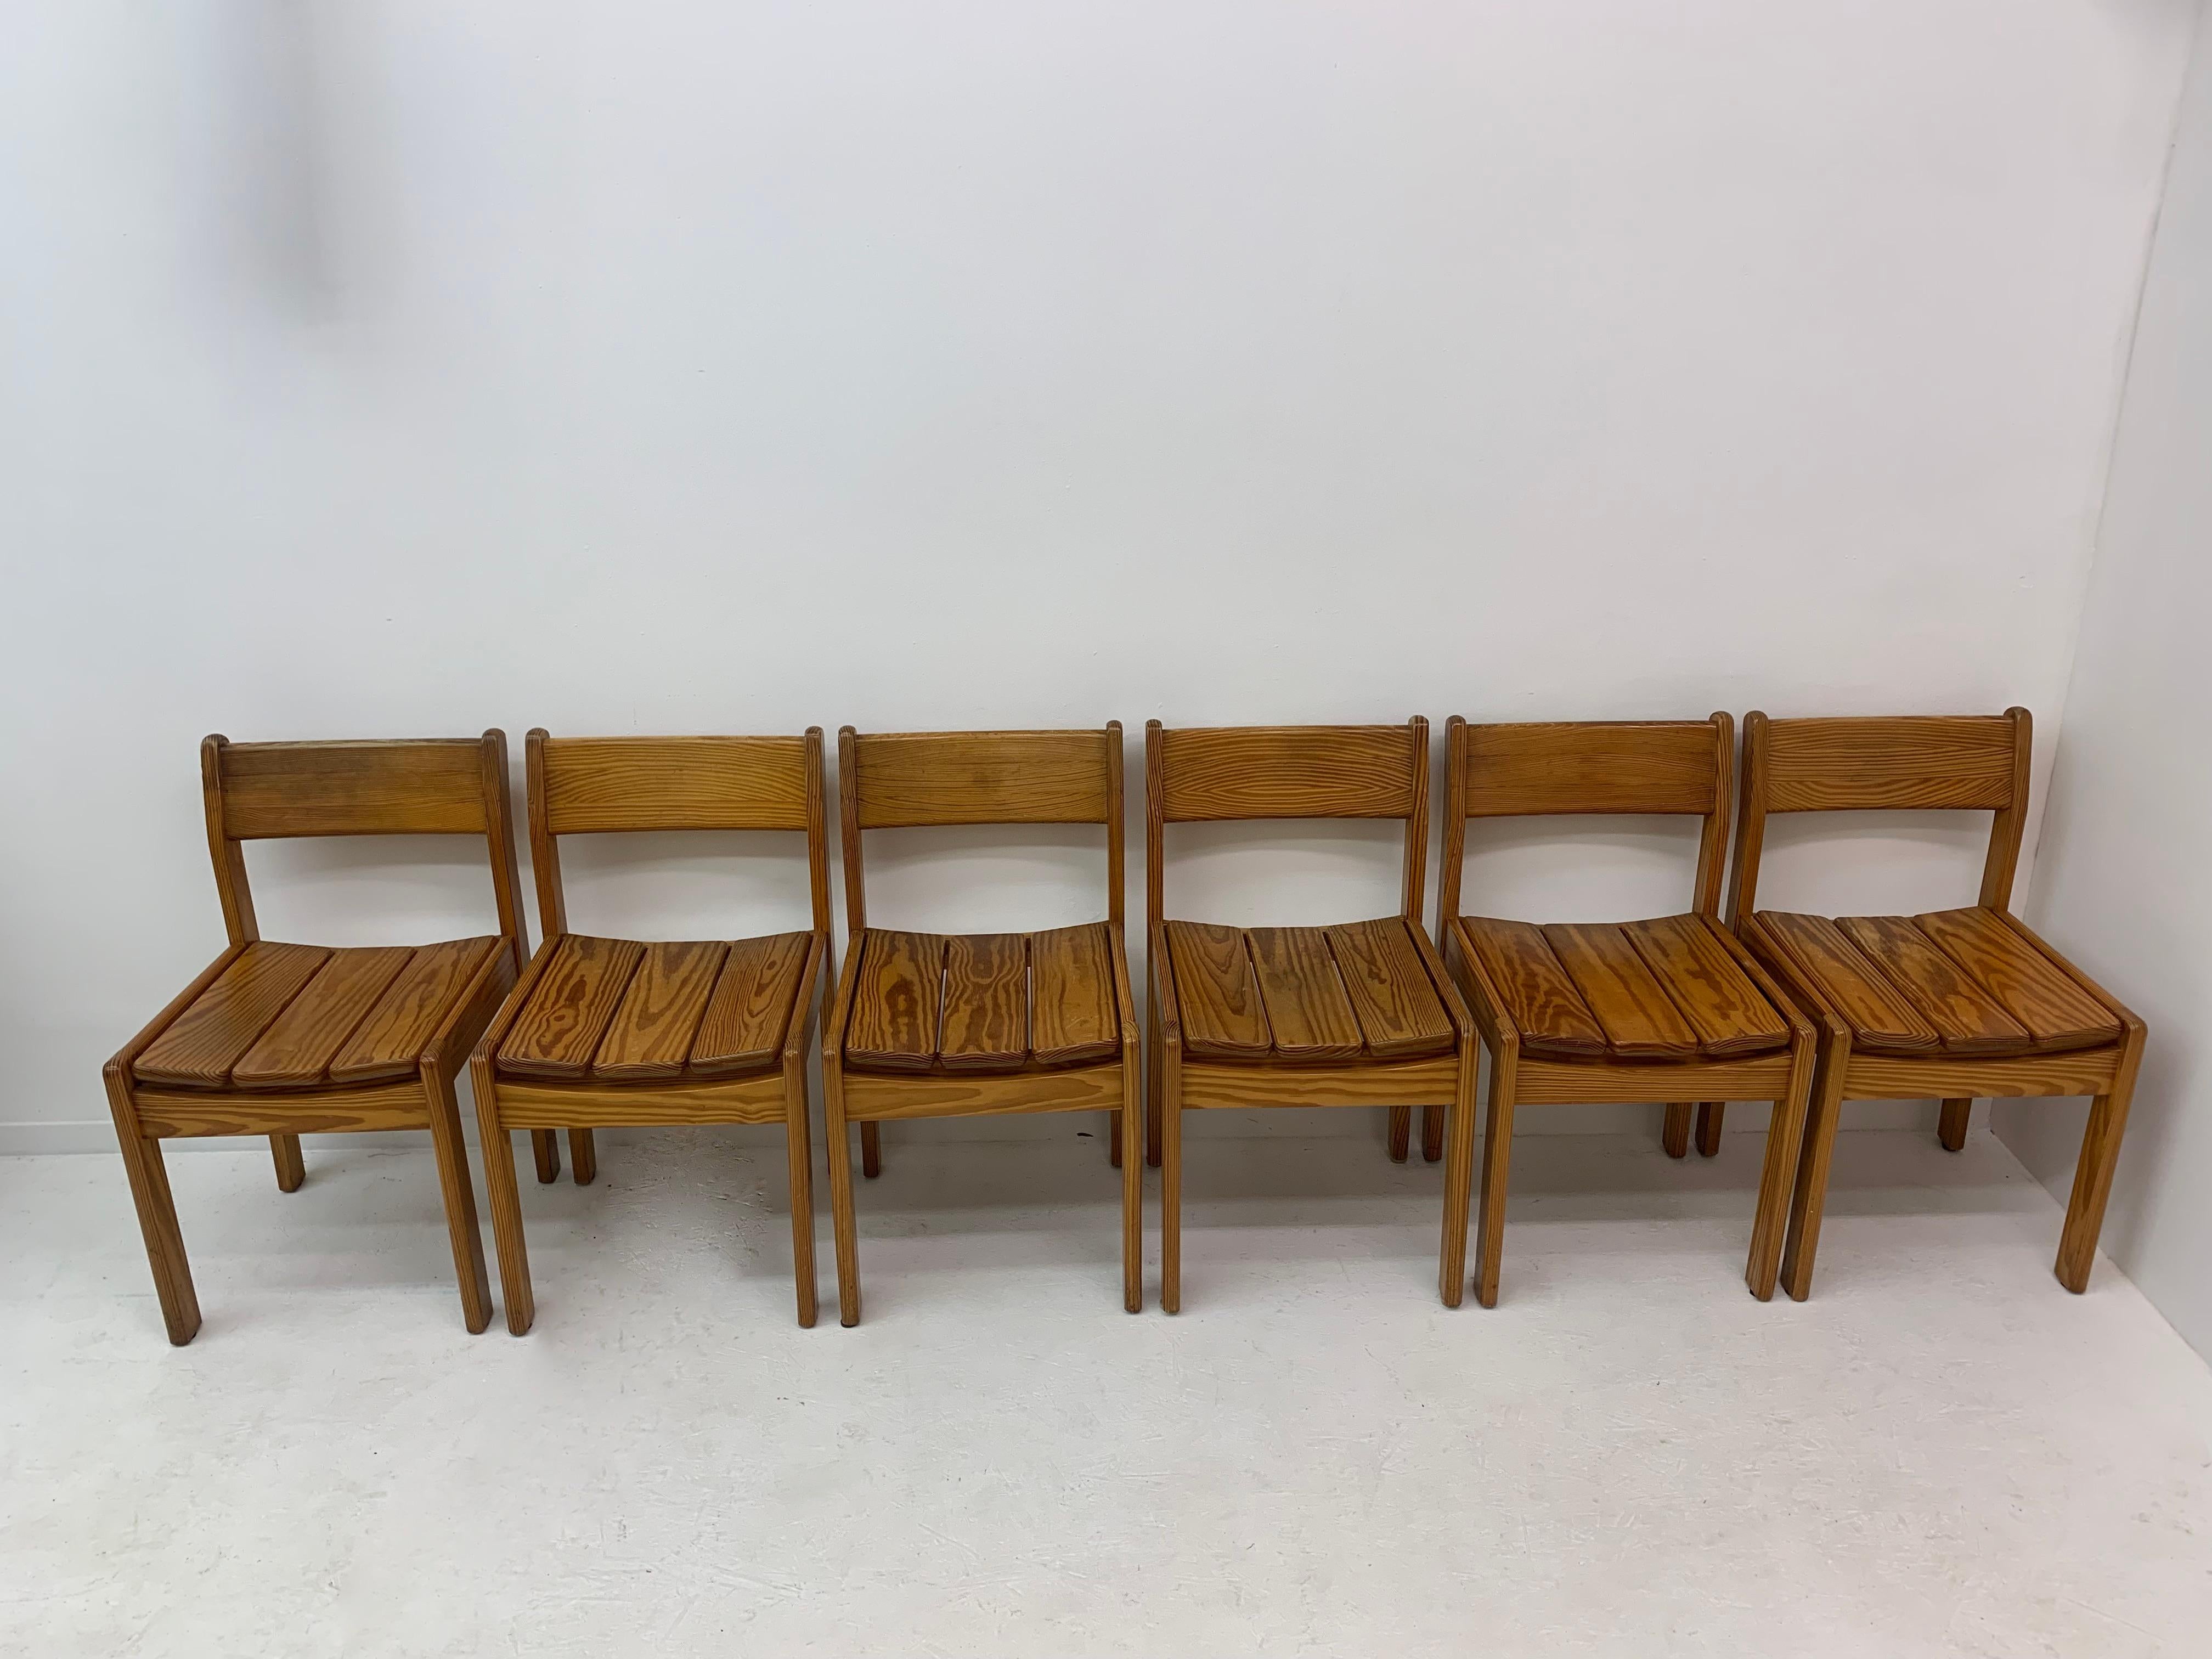 Set of 6 Pine Wood Dining Chairs, 1970’s For Sale 5